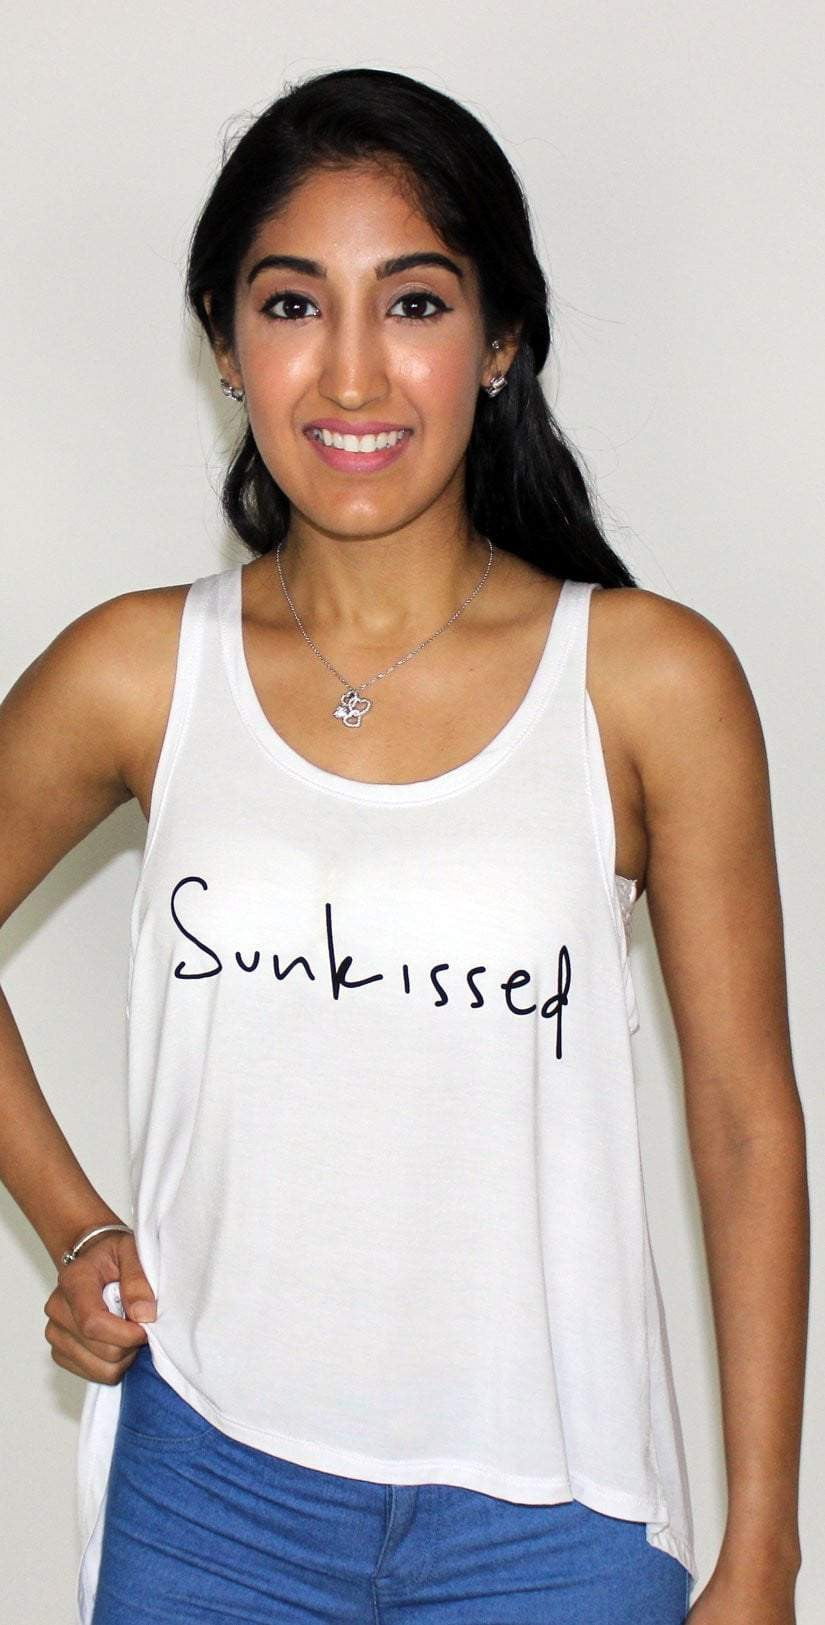 Ete Apparel Sunkissed White Tank Top 1-10-WHT-SK-17-P: